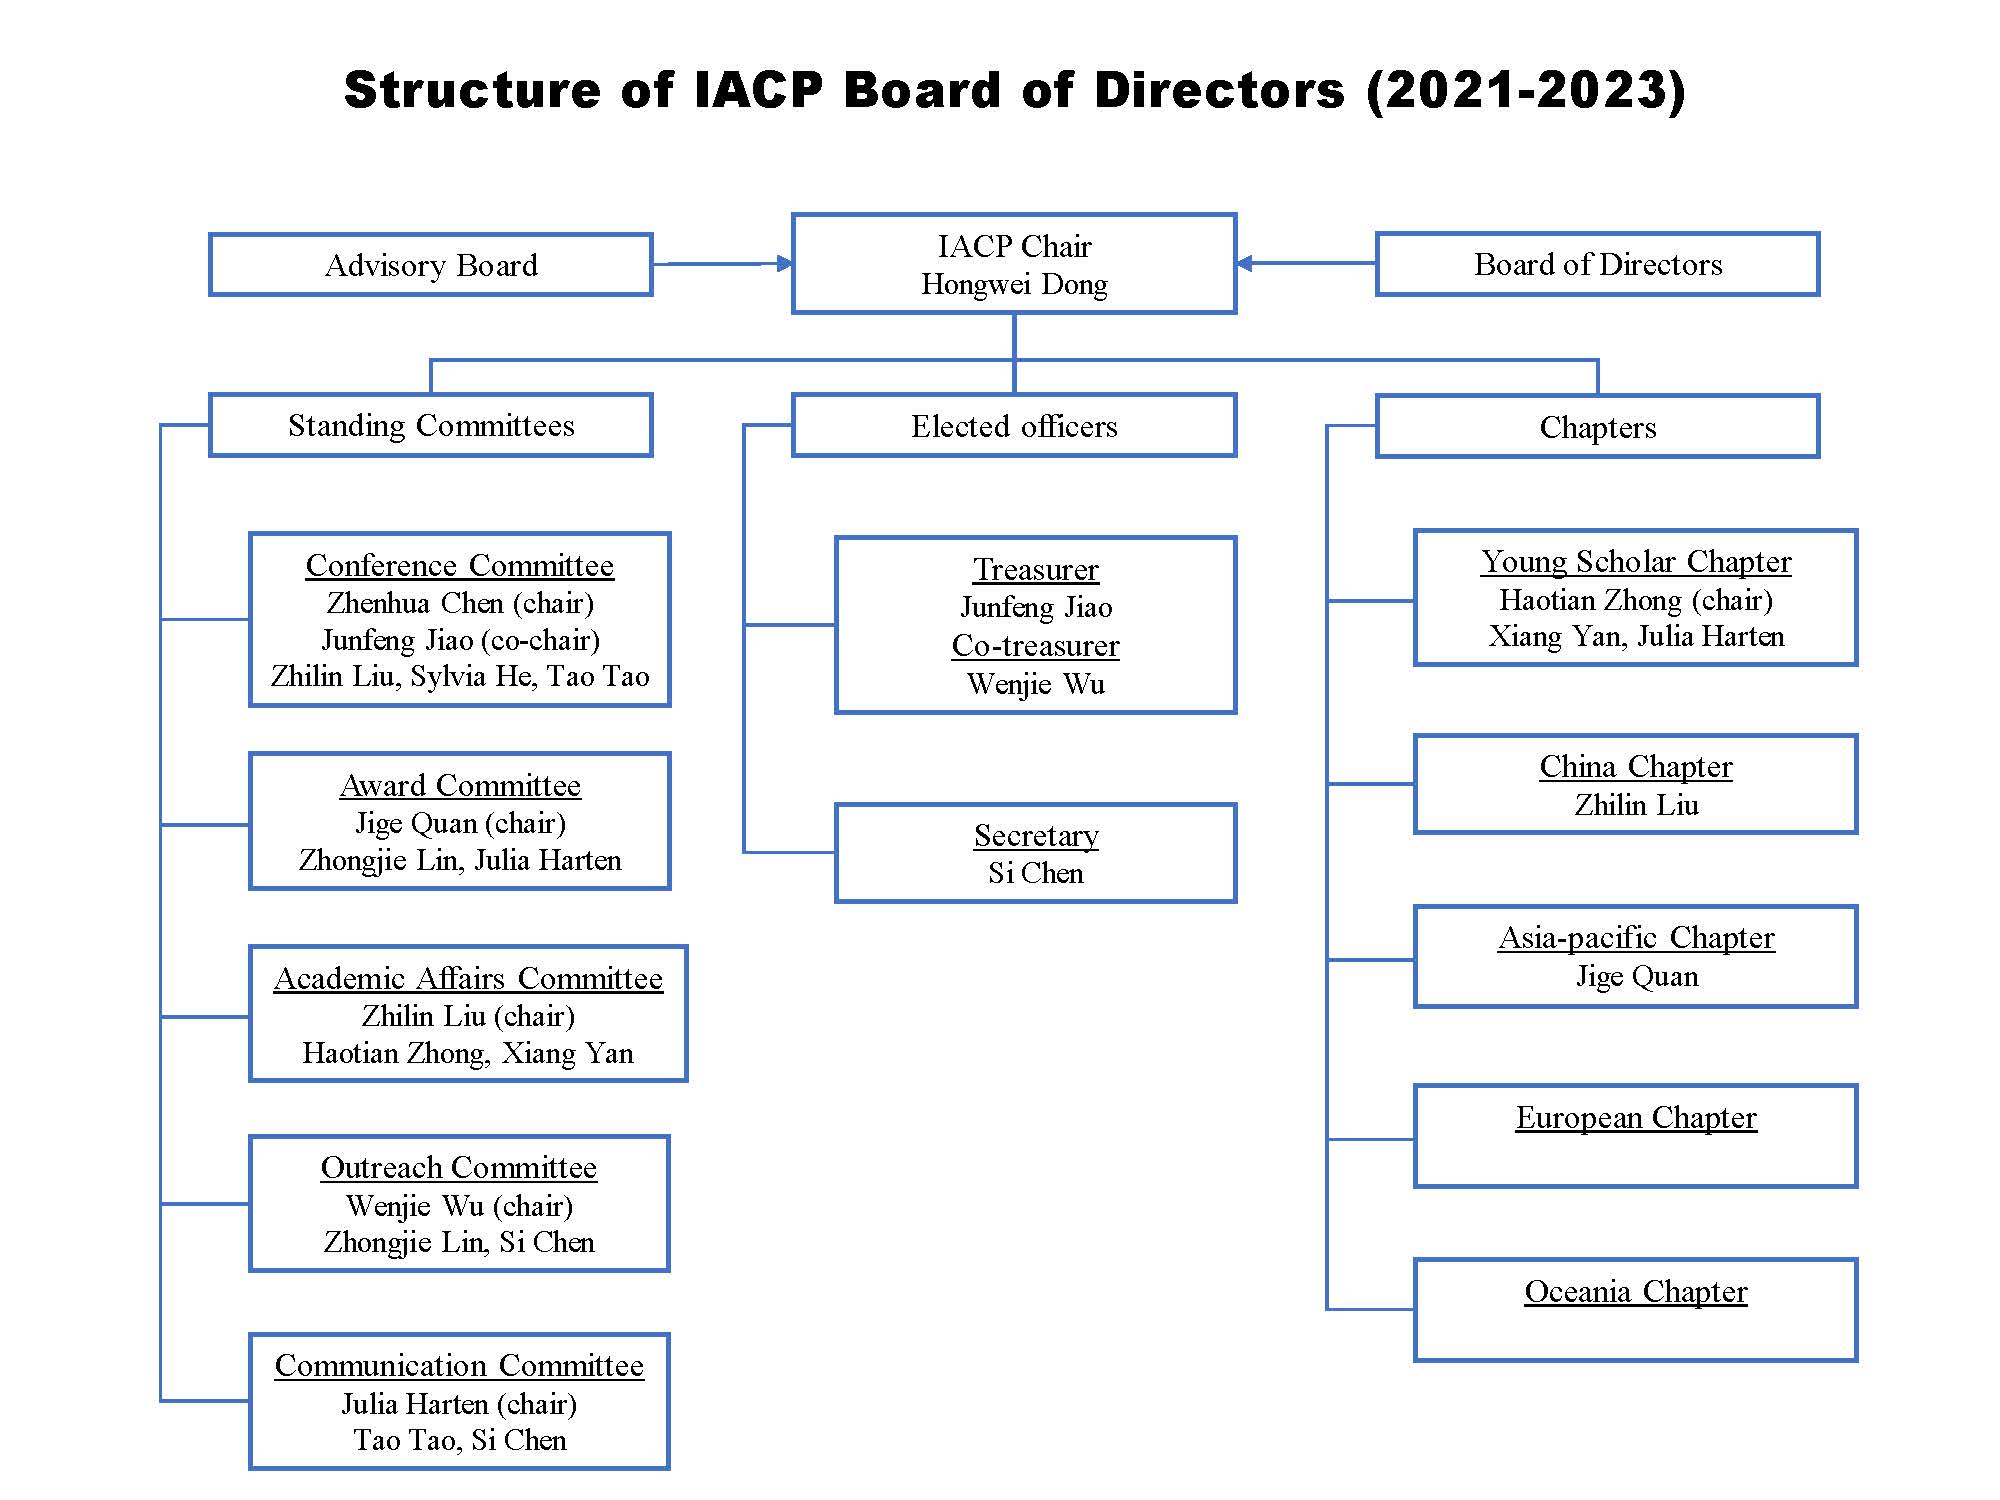 IACP structure